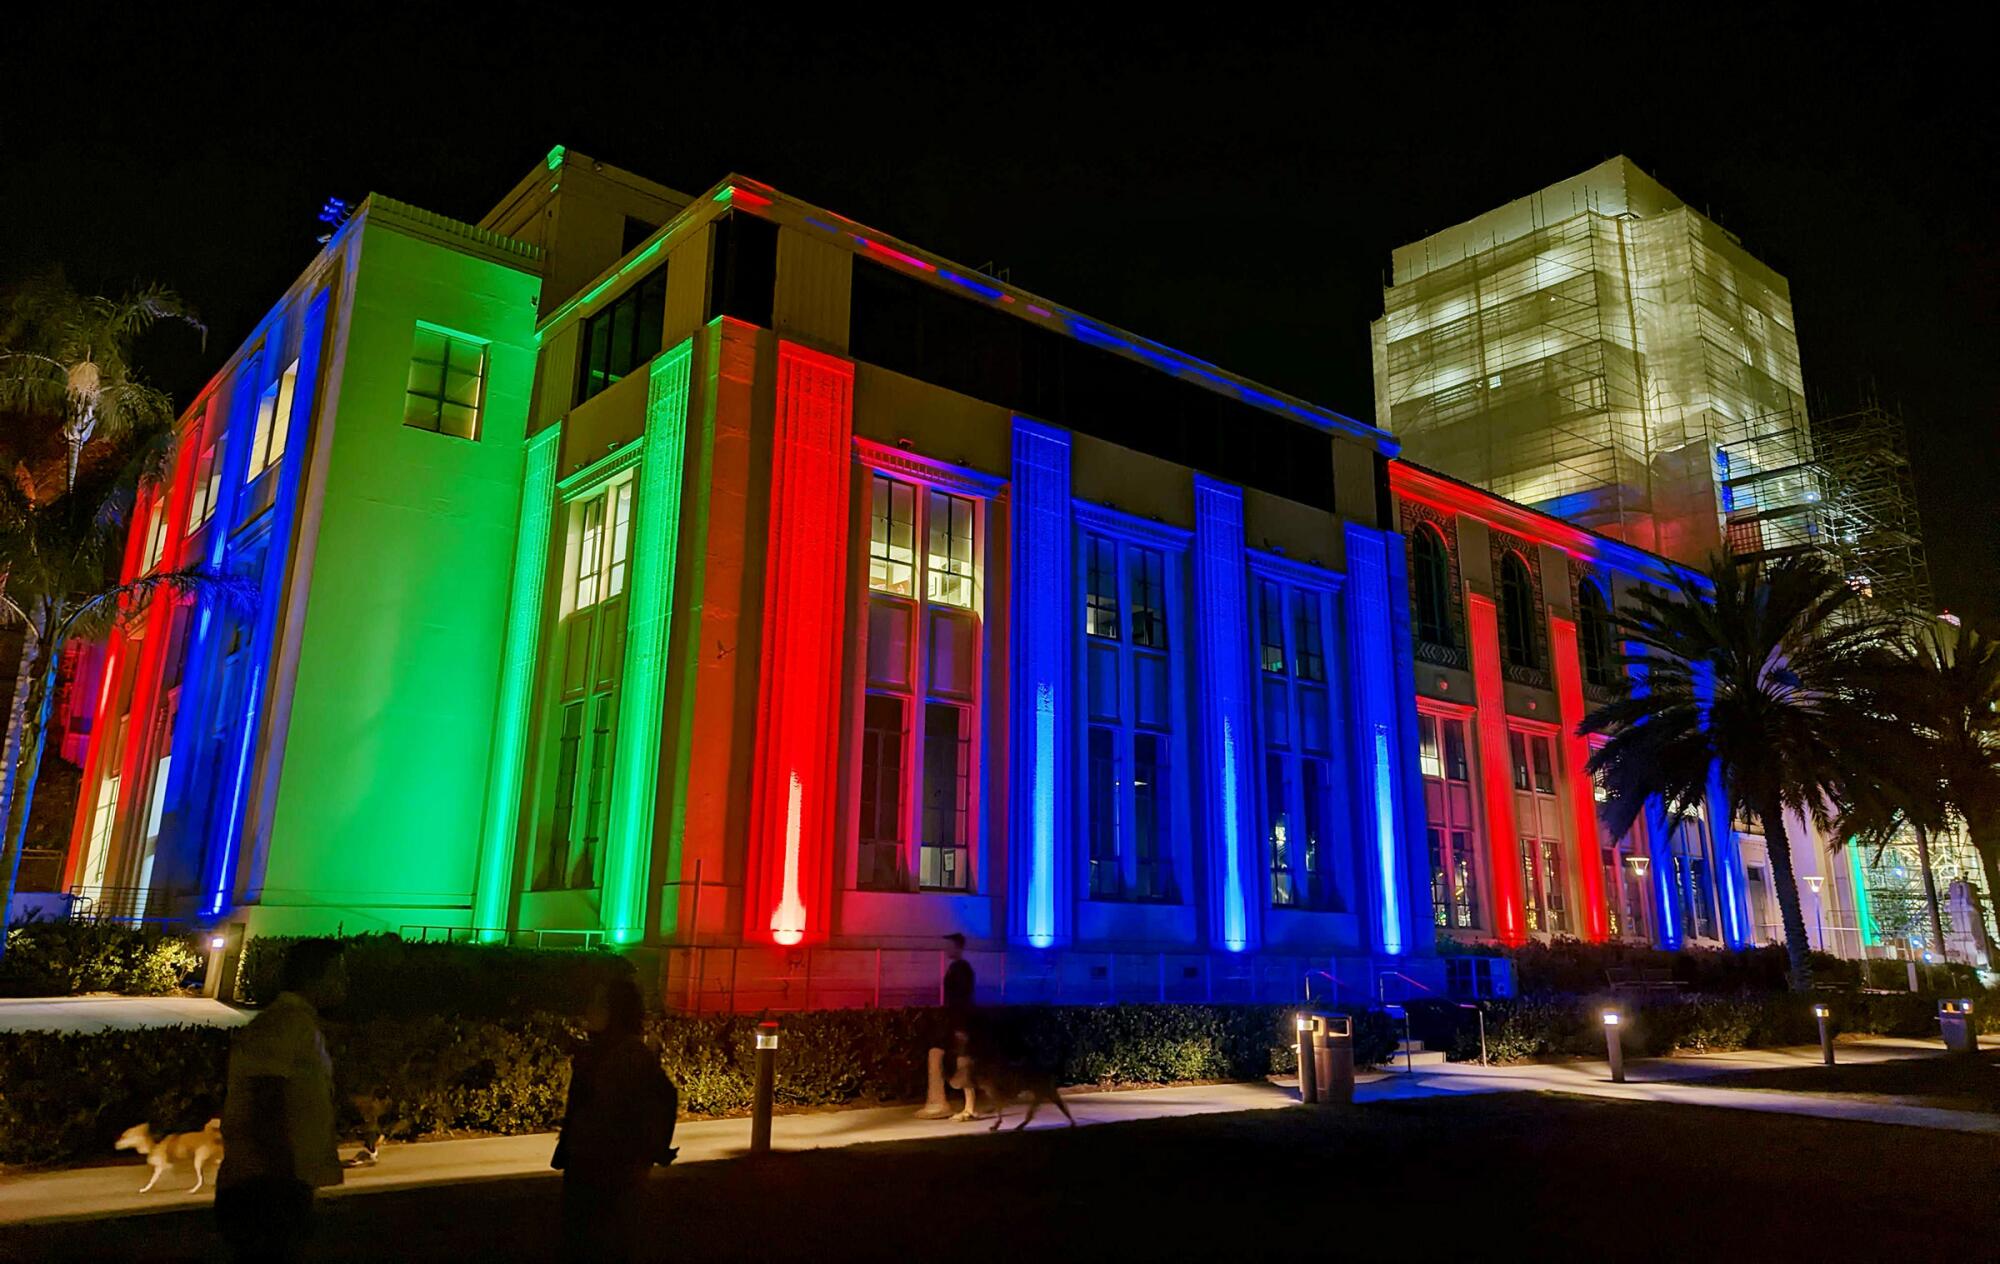 The San Diego County Administration Building was illuminated on Thursday